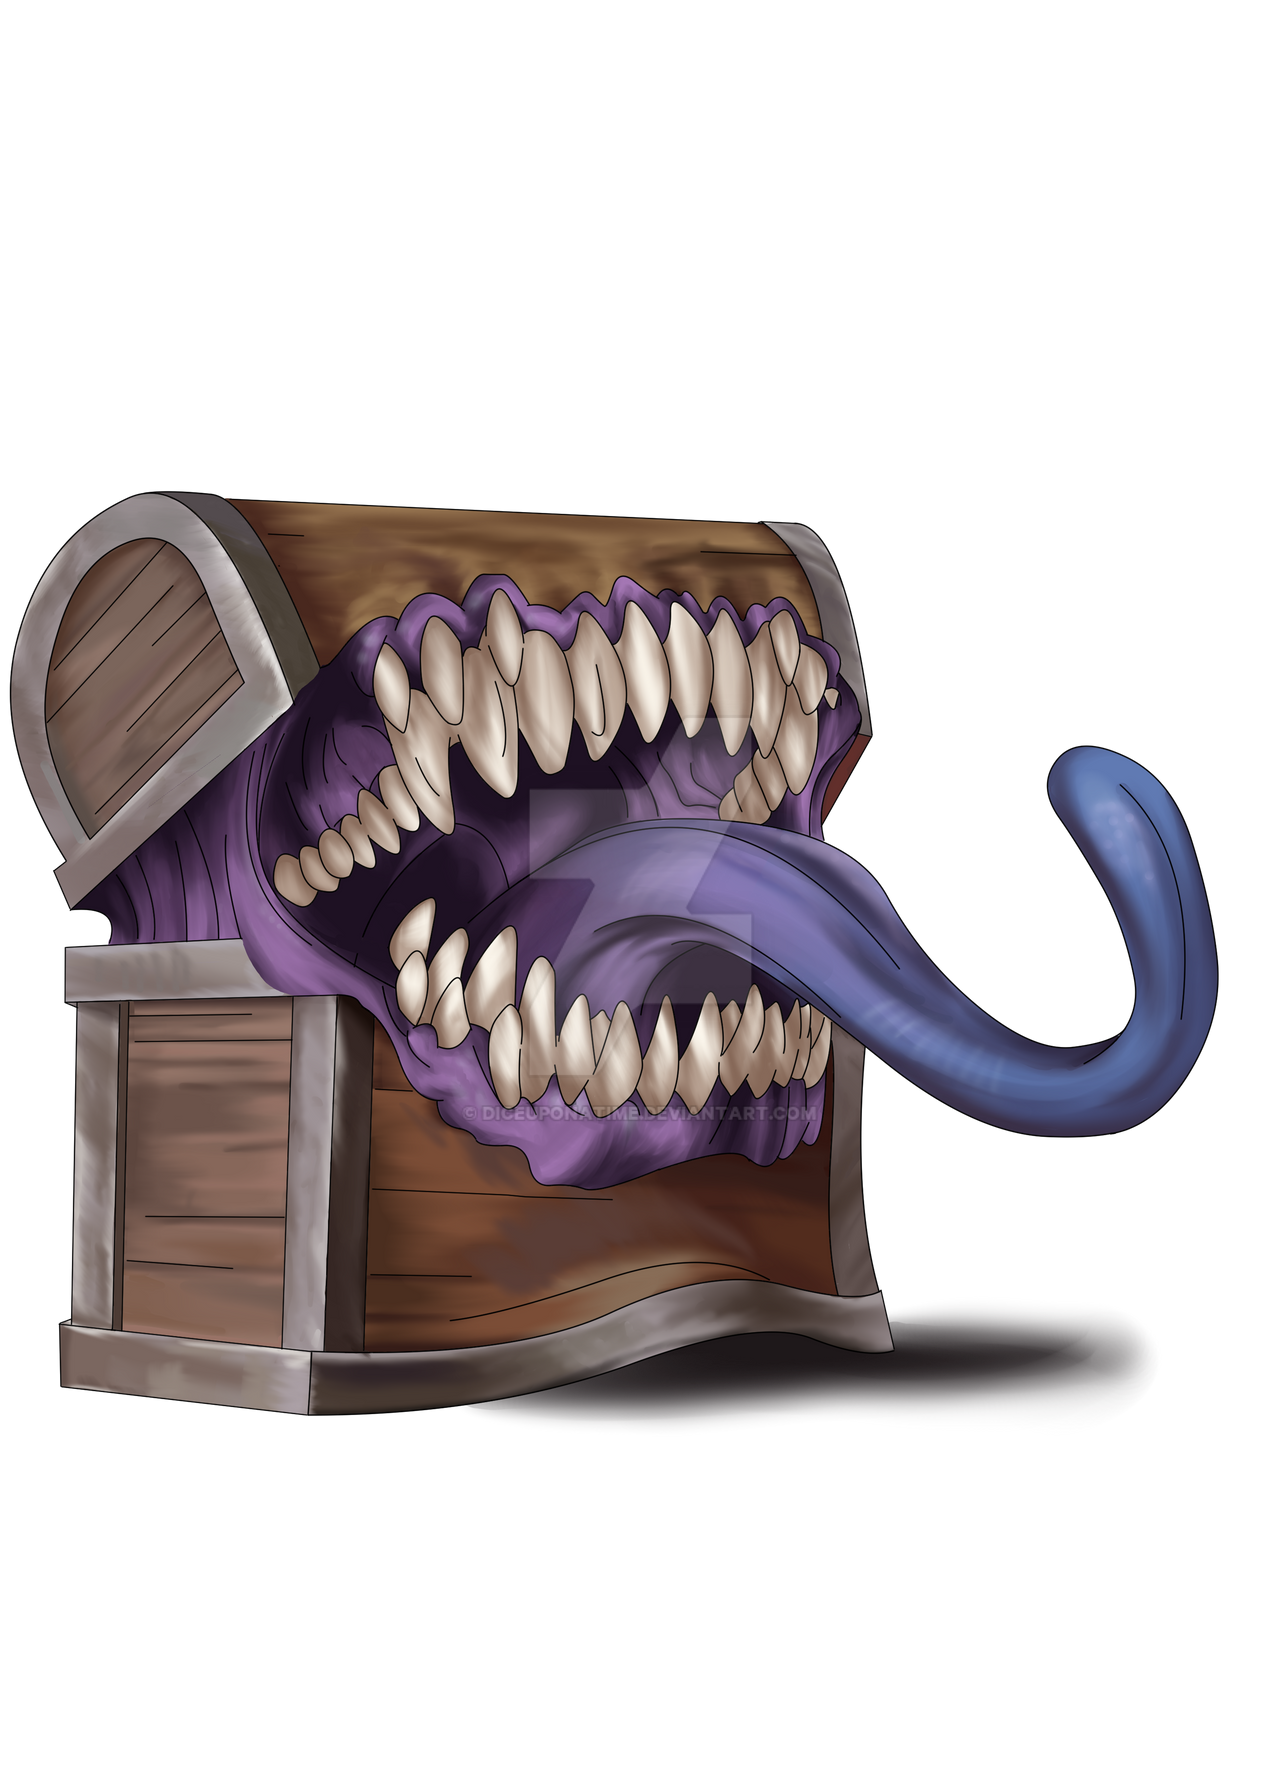 The Mimic 3 by Everlastingpeaches on DeviantArt